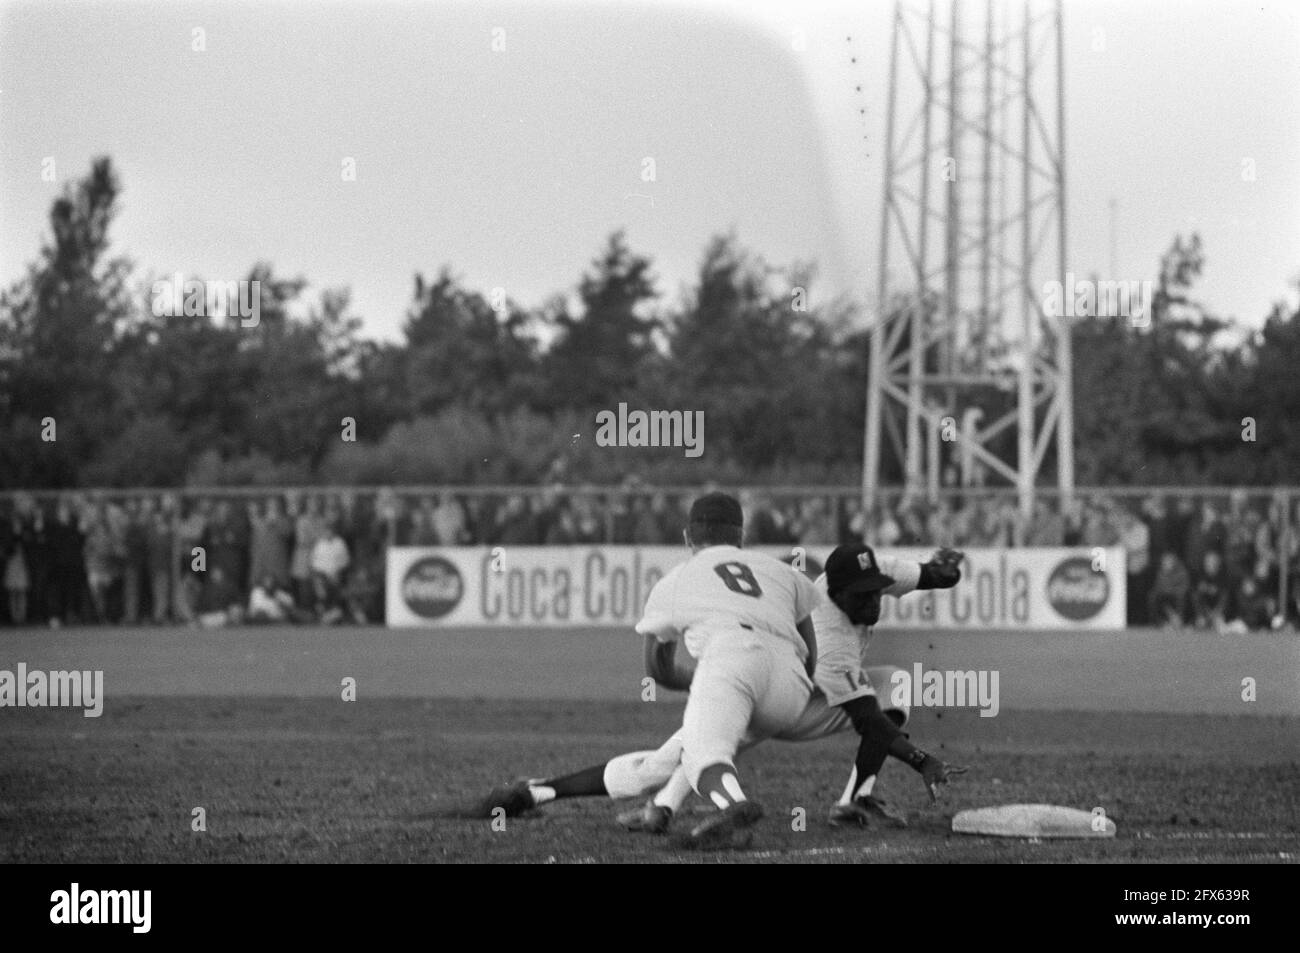 Haarlem Baseball Week Netherlands v. Sullivans. Game moments, July 23, 1968, baseball, sports, The Netherlands, 20th century press agency photo, news to remember, documentary, historic photography 1945-1990, visual stories, human history of the Twentieth Century, capturing moments in time Stock Photo